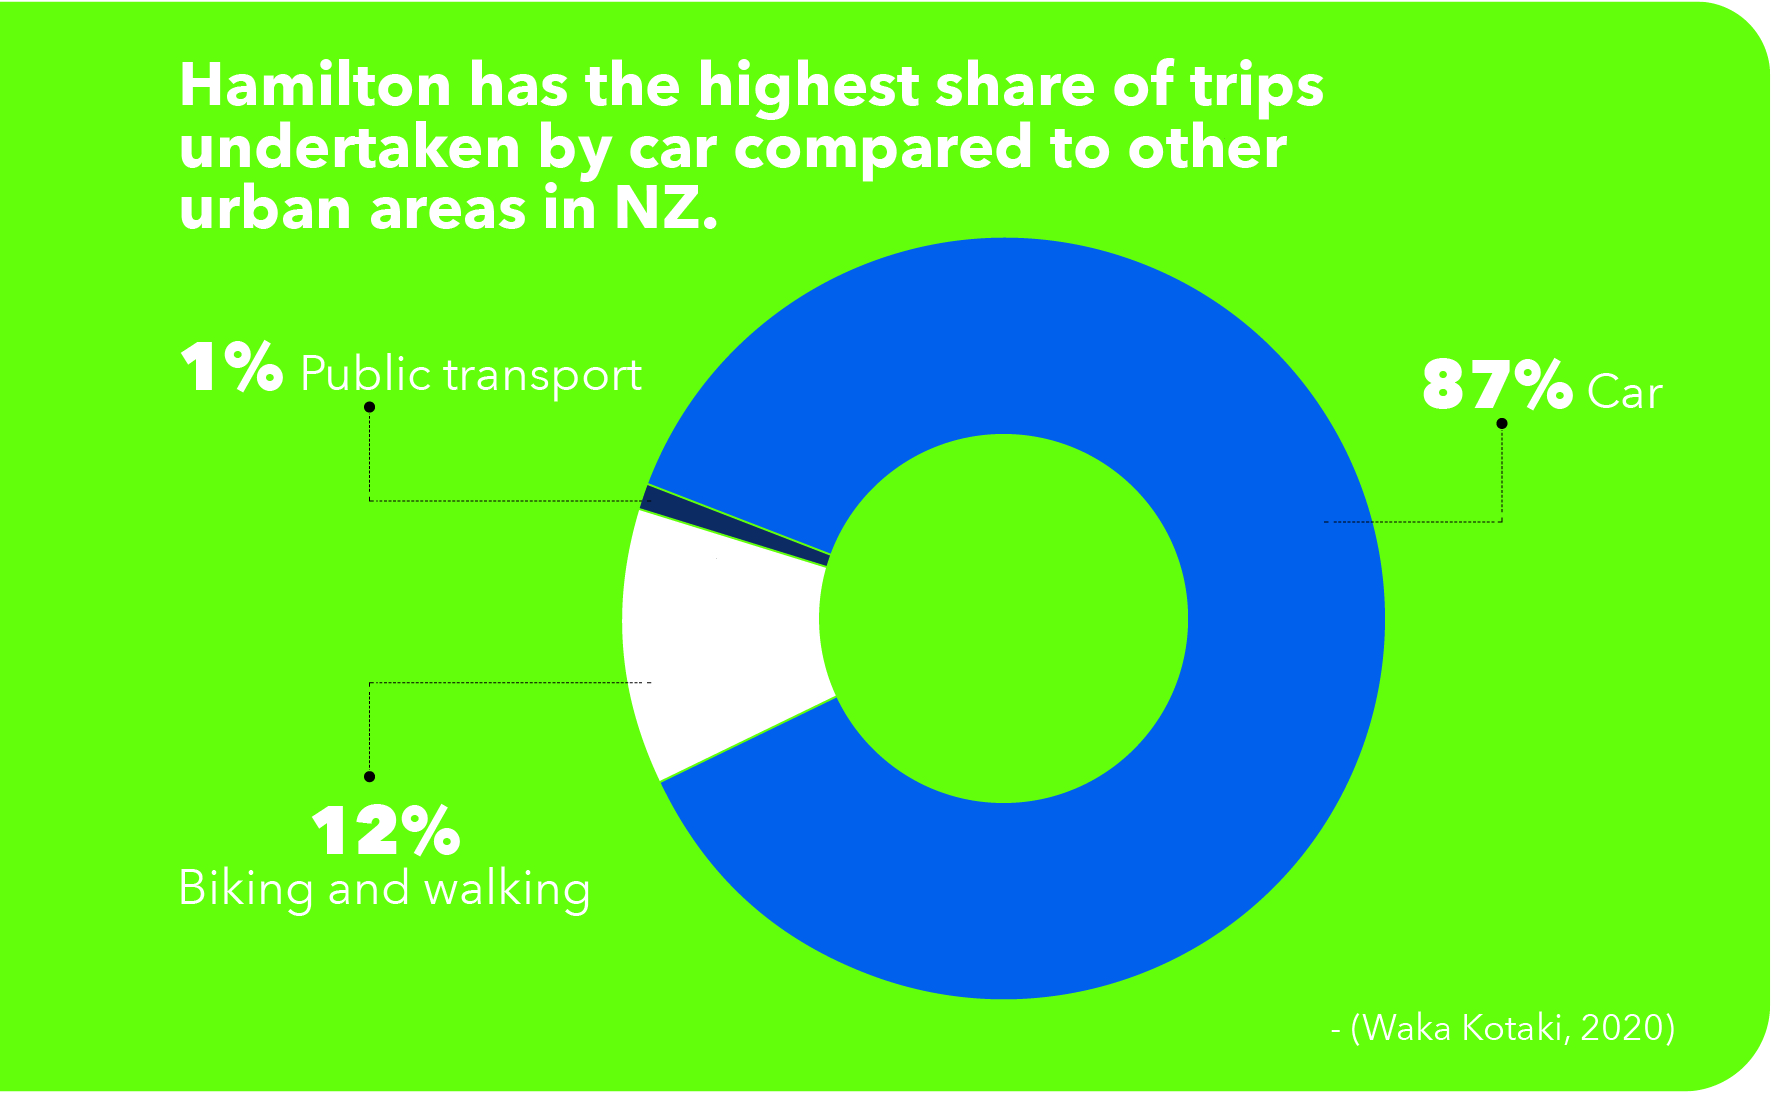 Hamilton has the highest share of trips undertaken by car compared to other urban areas in NZ